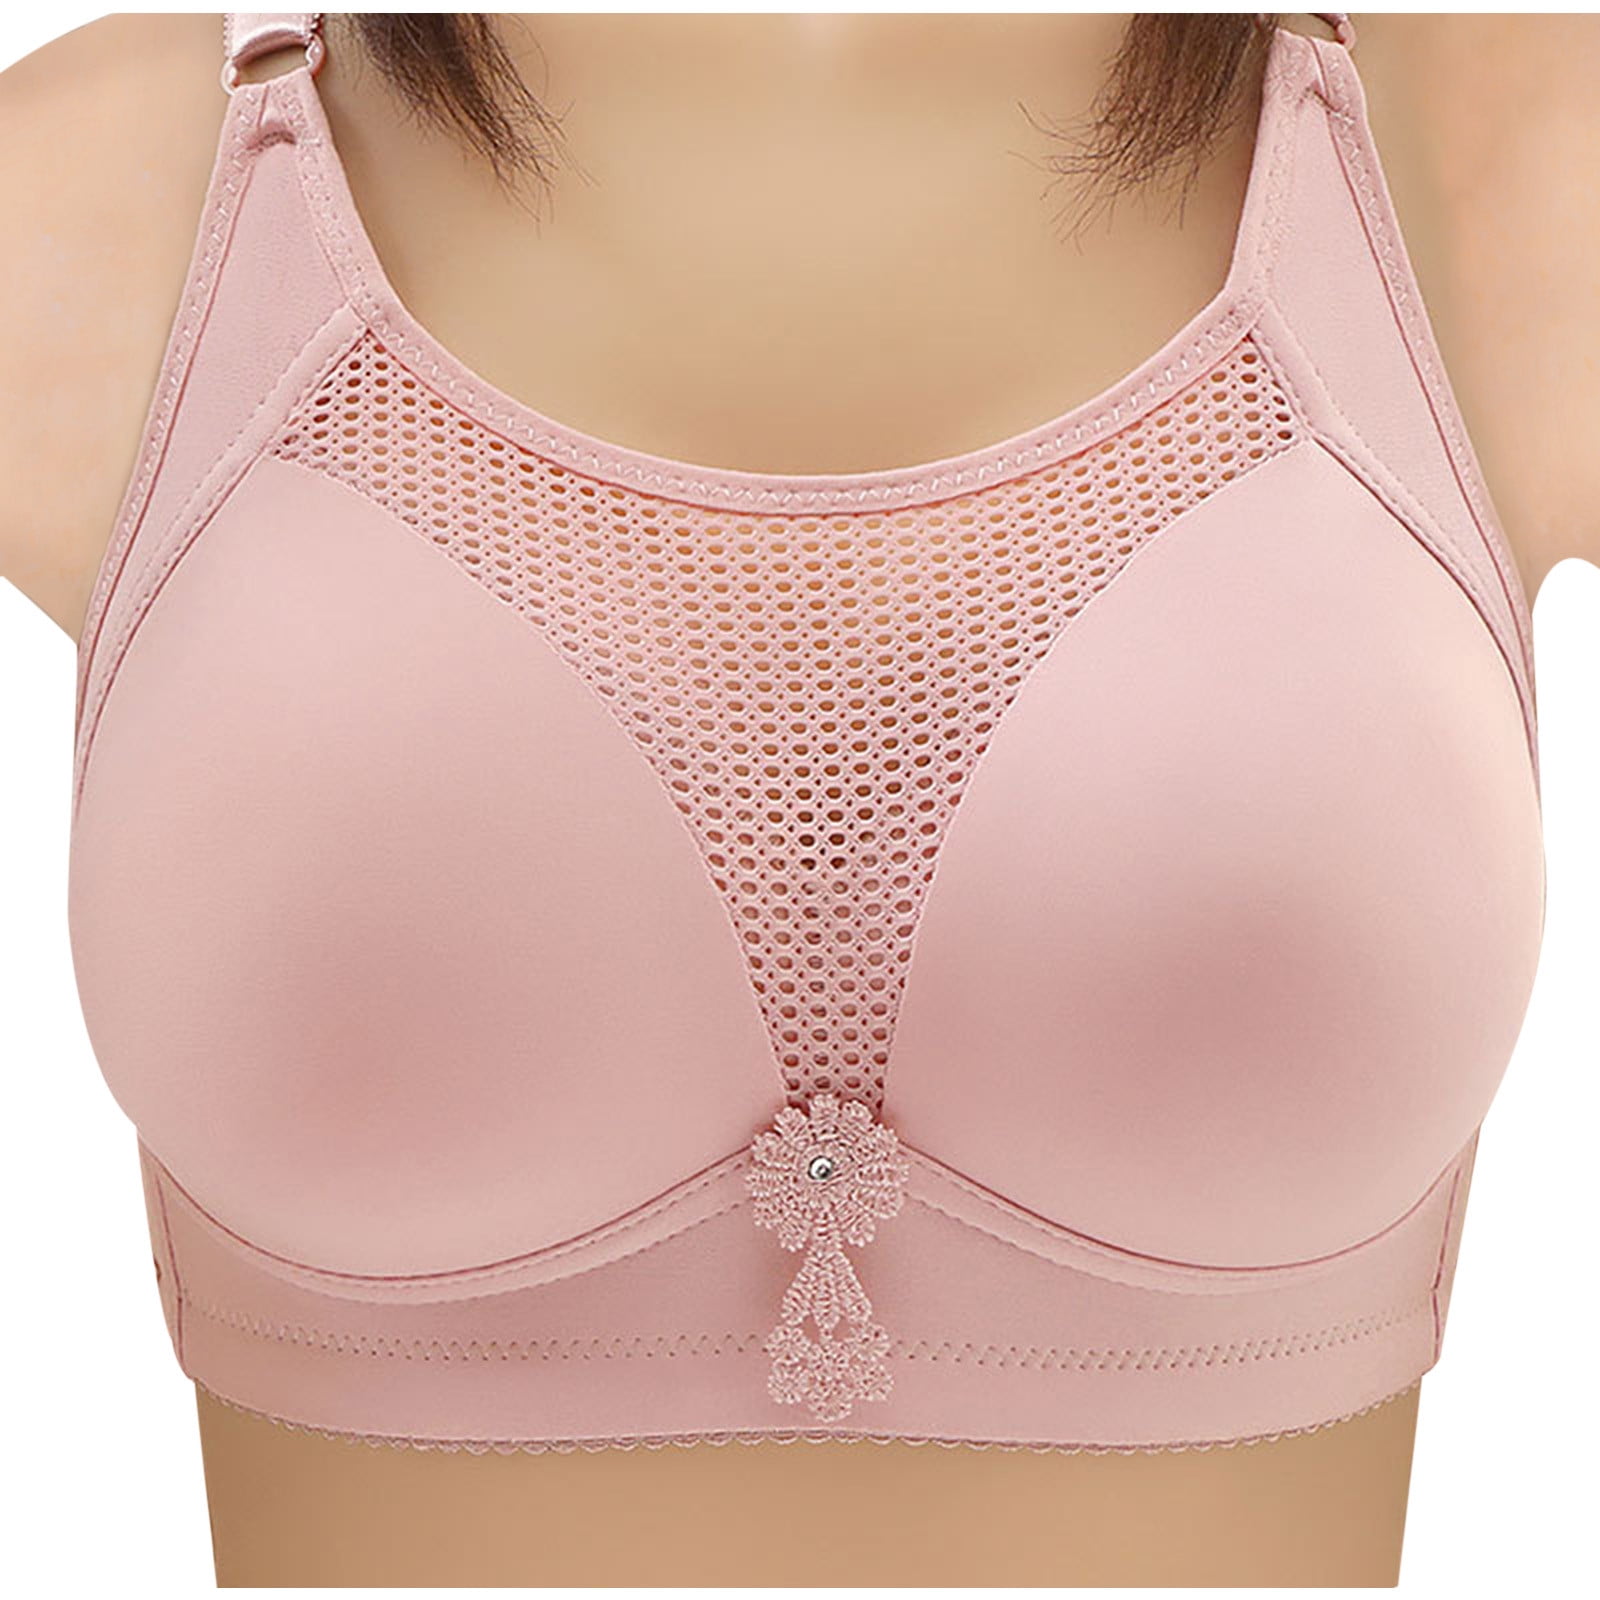 Ladies Plus Size Bra Non-Wired Full Coverage Push Up Support Bras